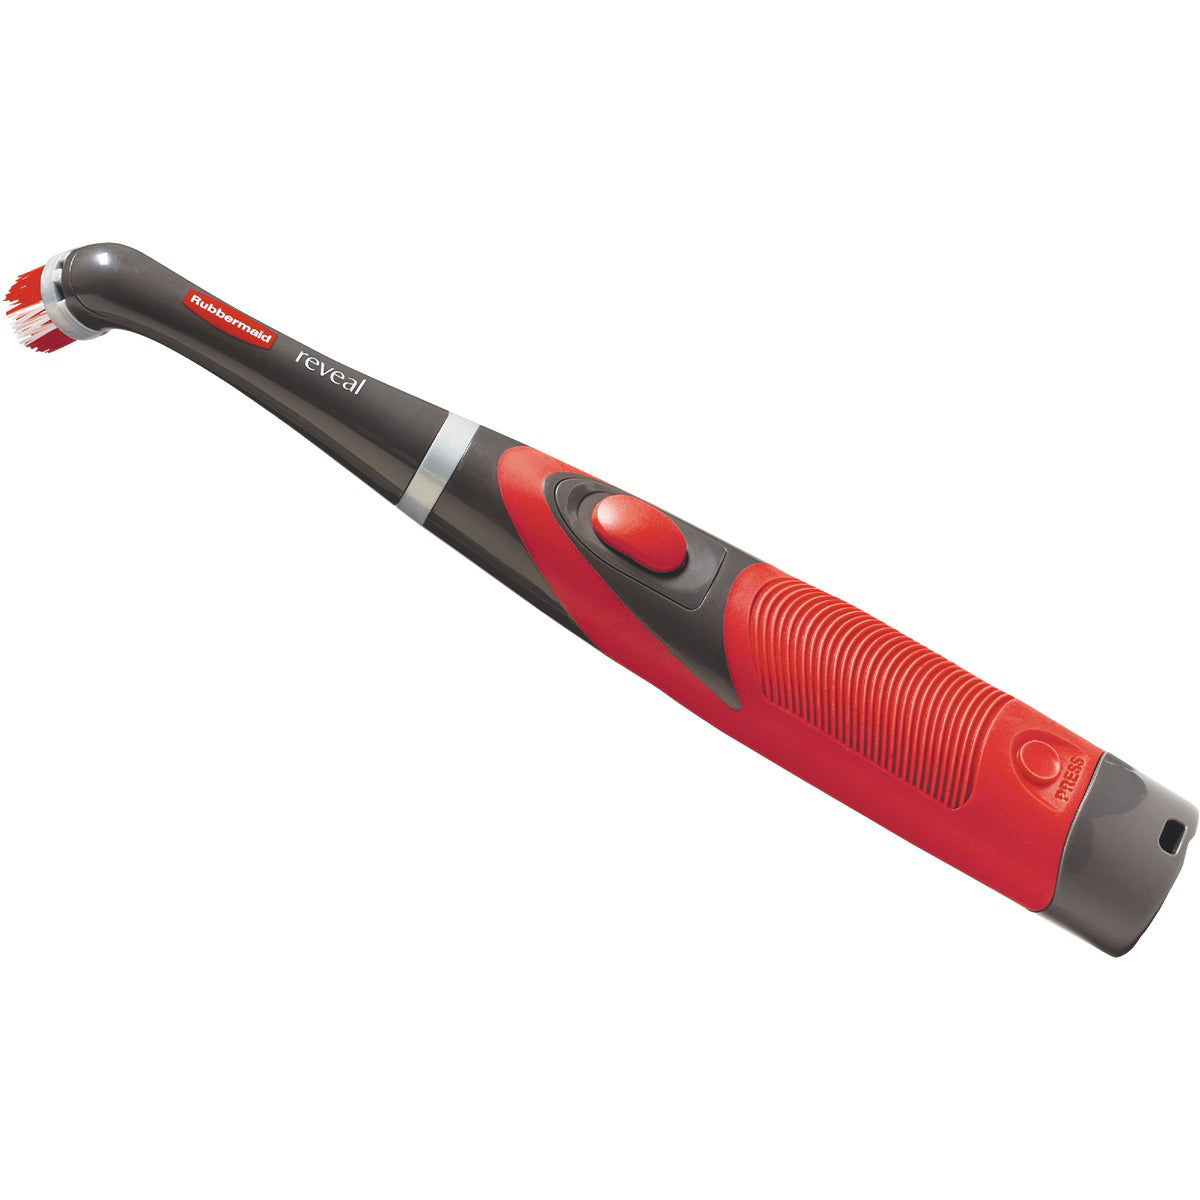 Rubbermaid Power Scrubber With 1 All-purpose Scrubbing Head And 1 Grout  Scrubbing Head : Target